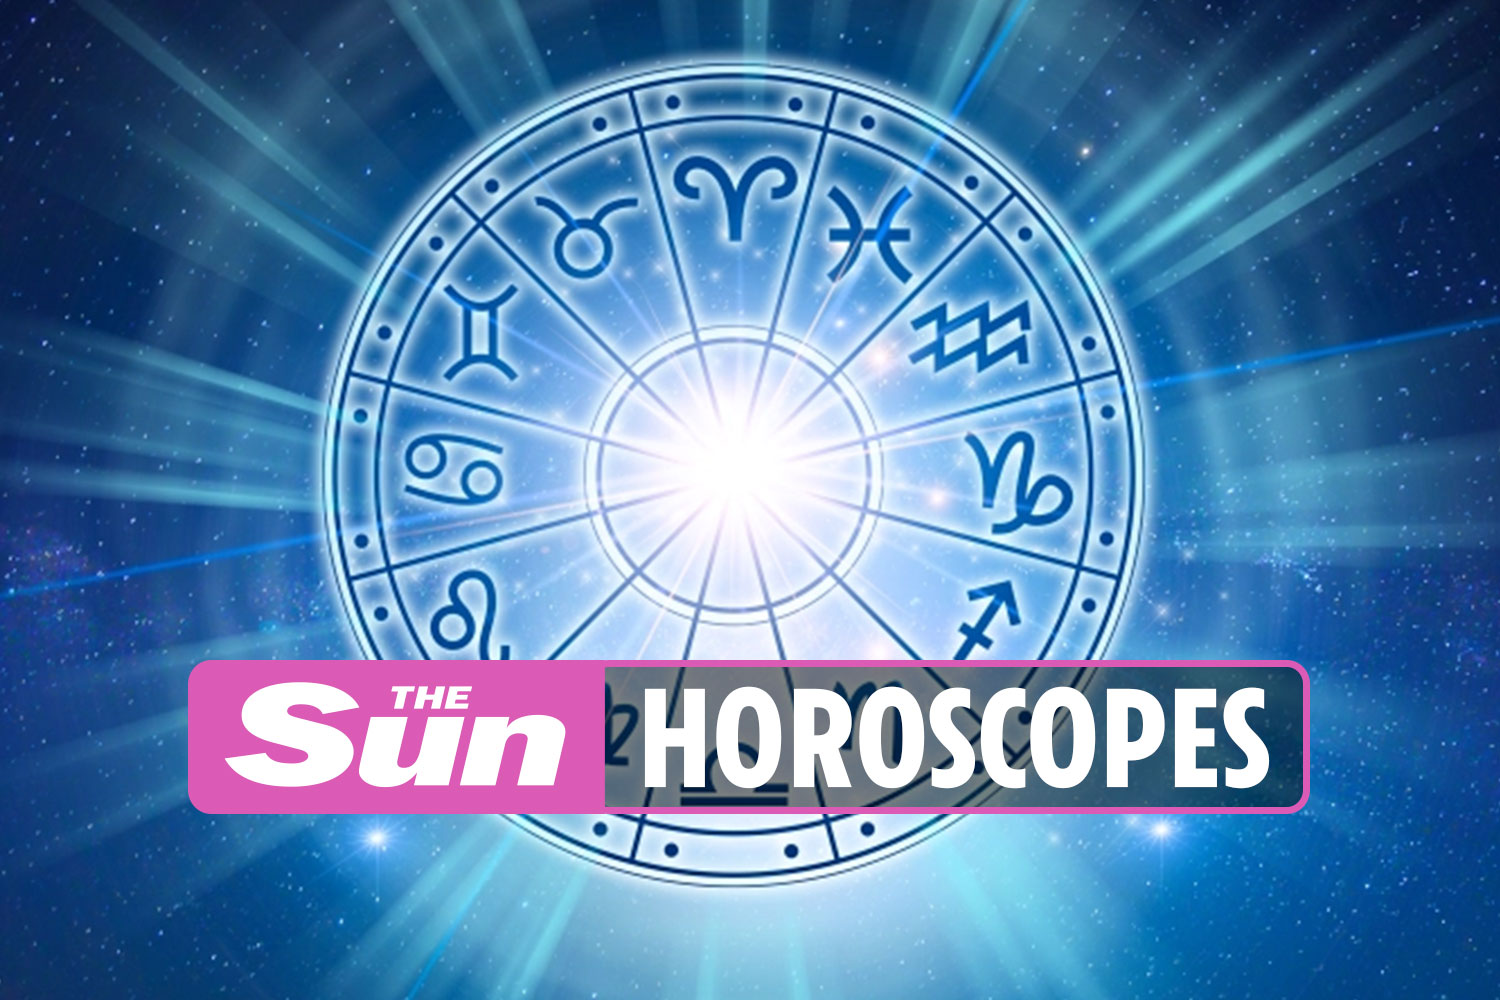 What is the purpose and function of astrology?